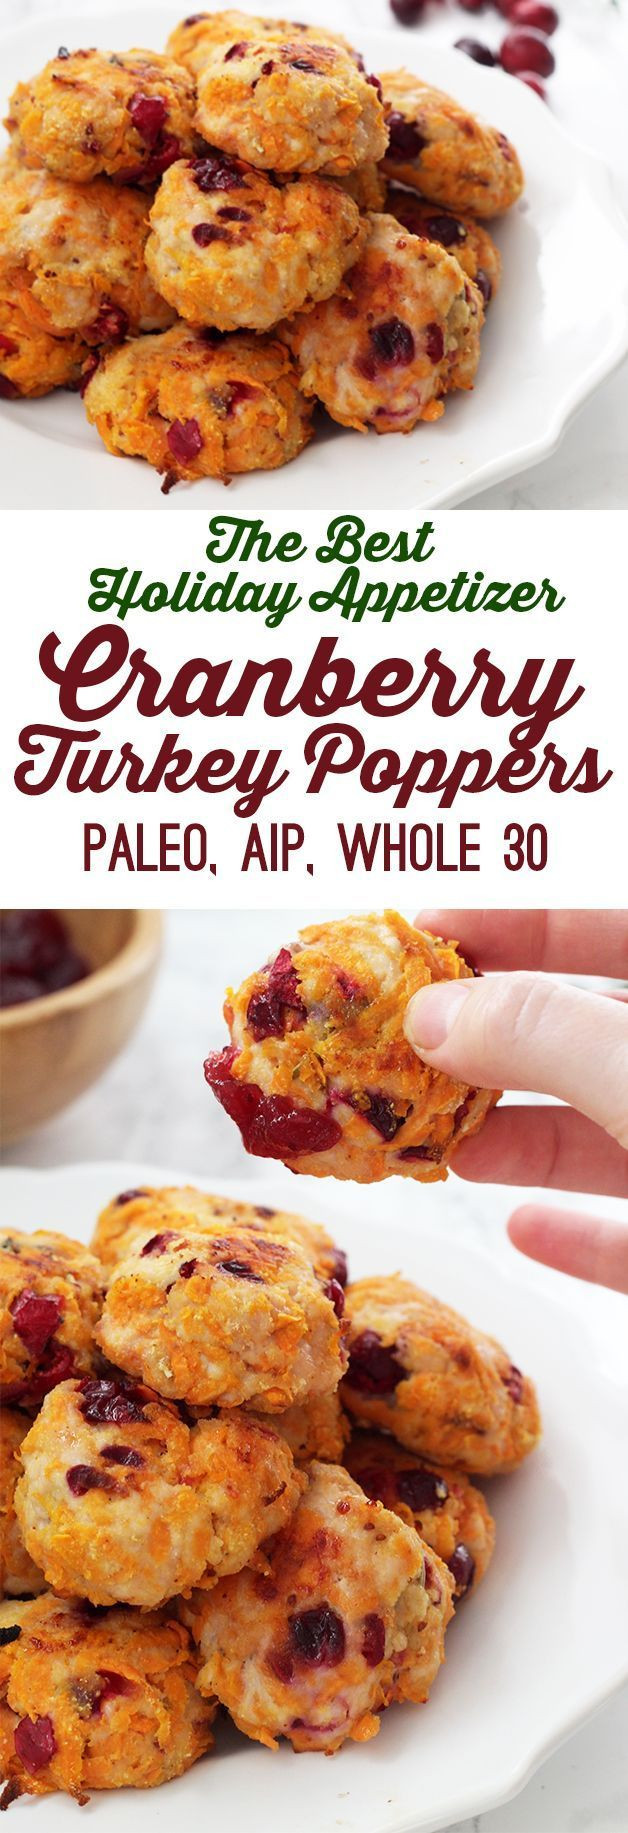 Paleo Thanksgiving Appetizers
 Cranberry Sweet Potato Turkey Poppers Paleo AIP Whole